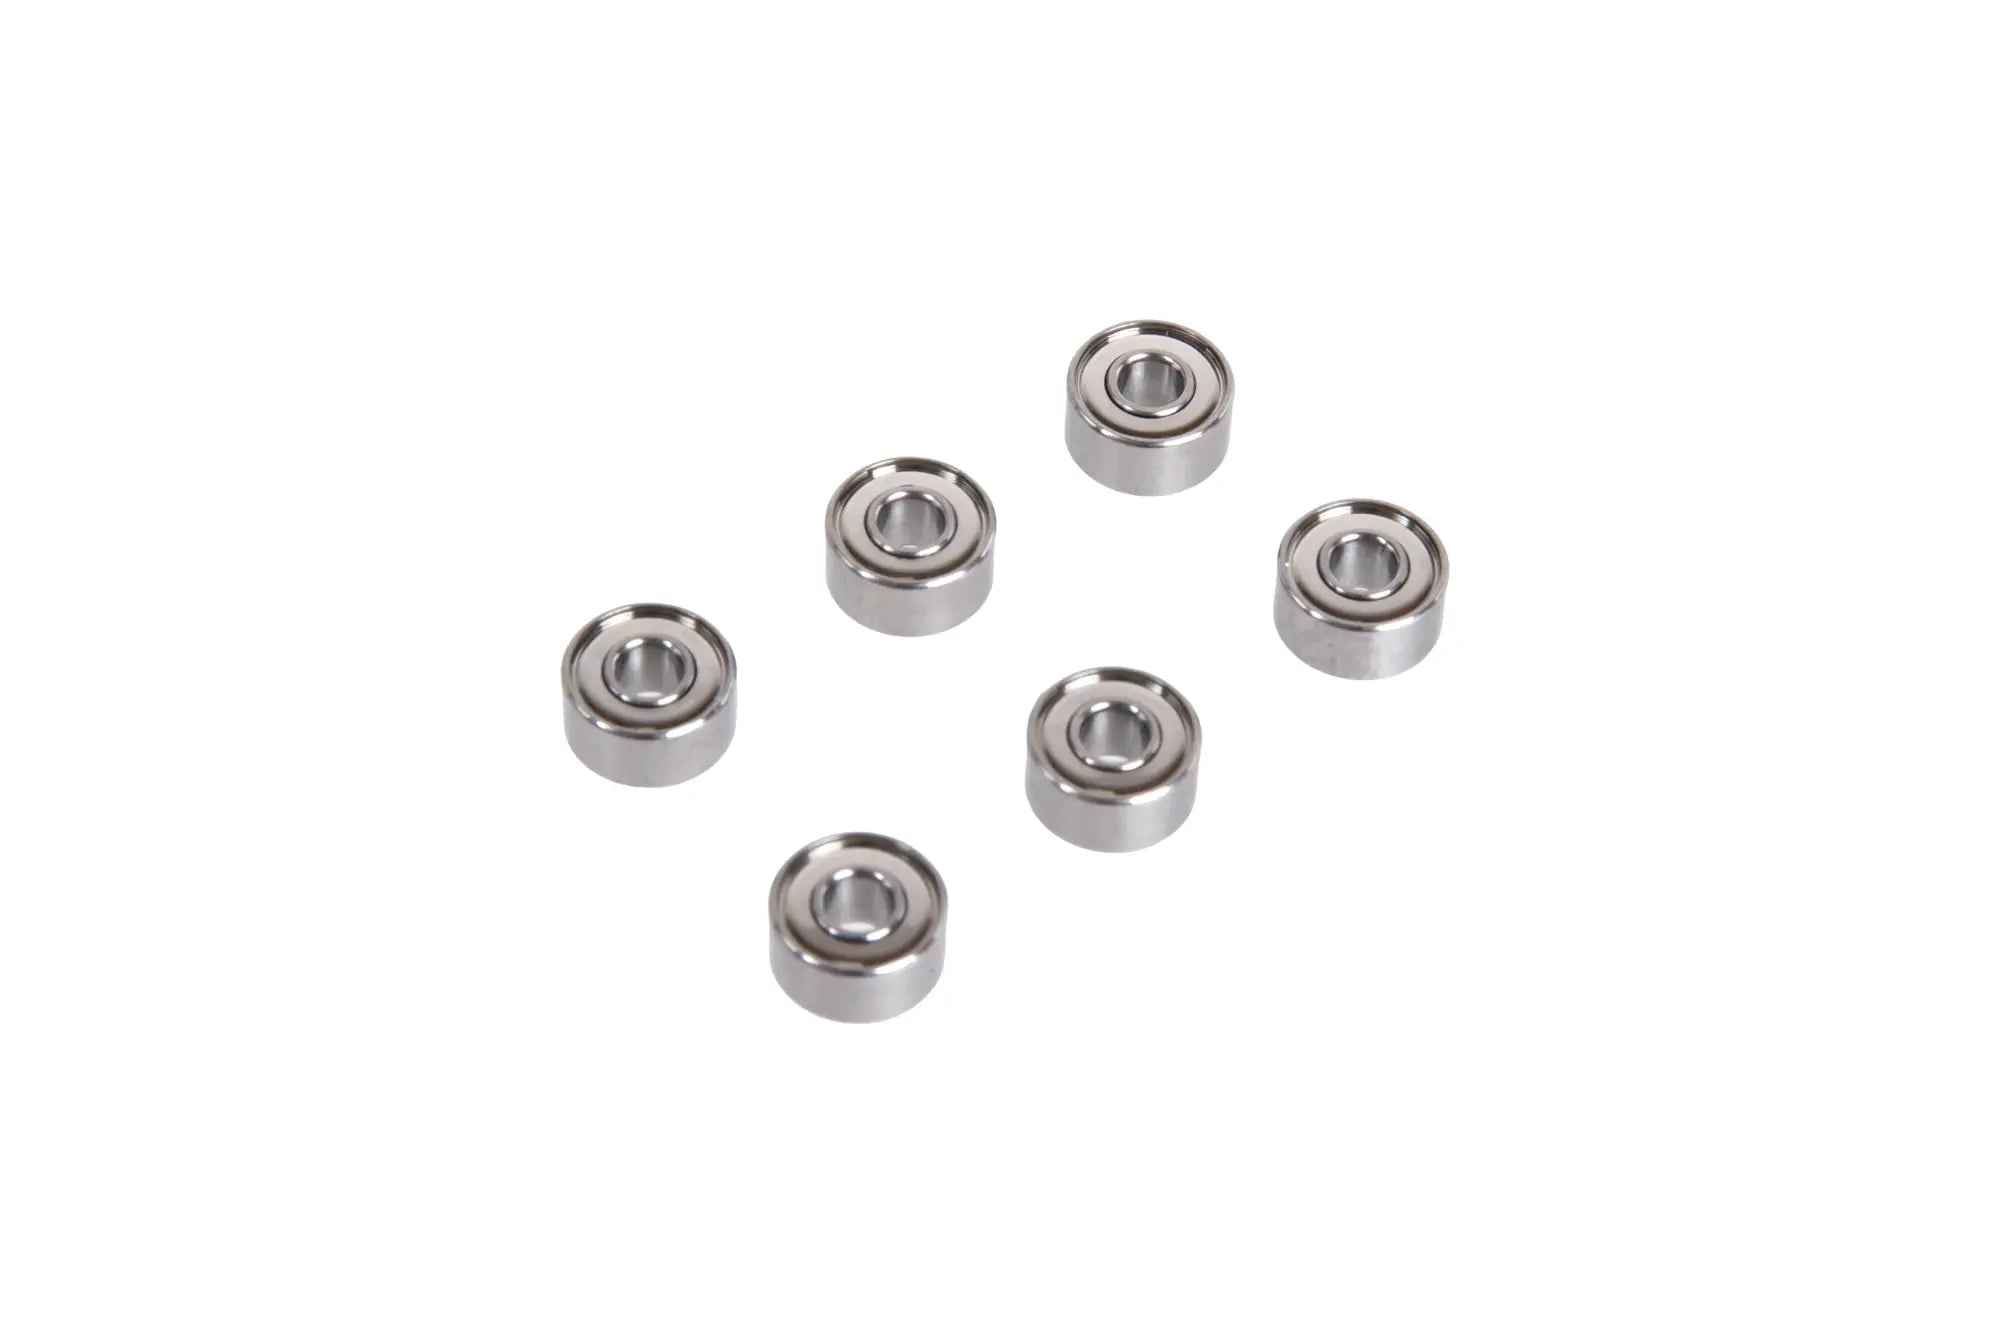 8mm EPeS ball bearing set for A&K M249 replicas